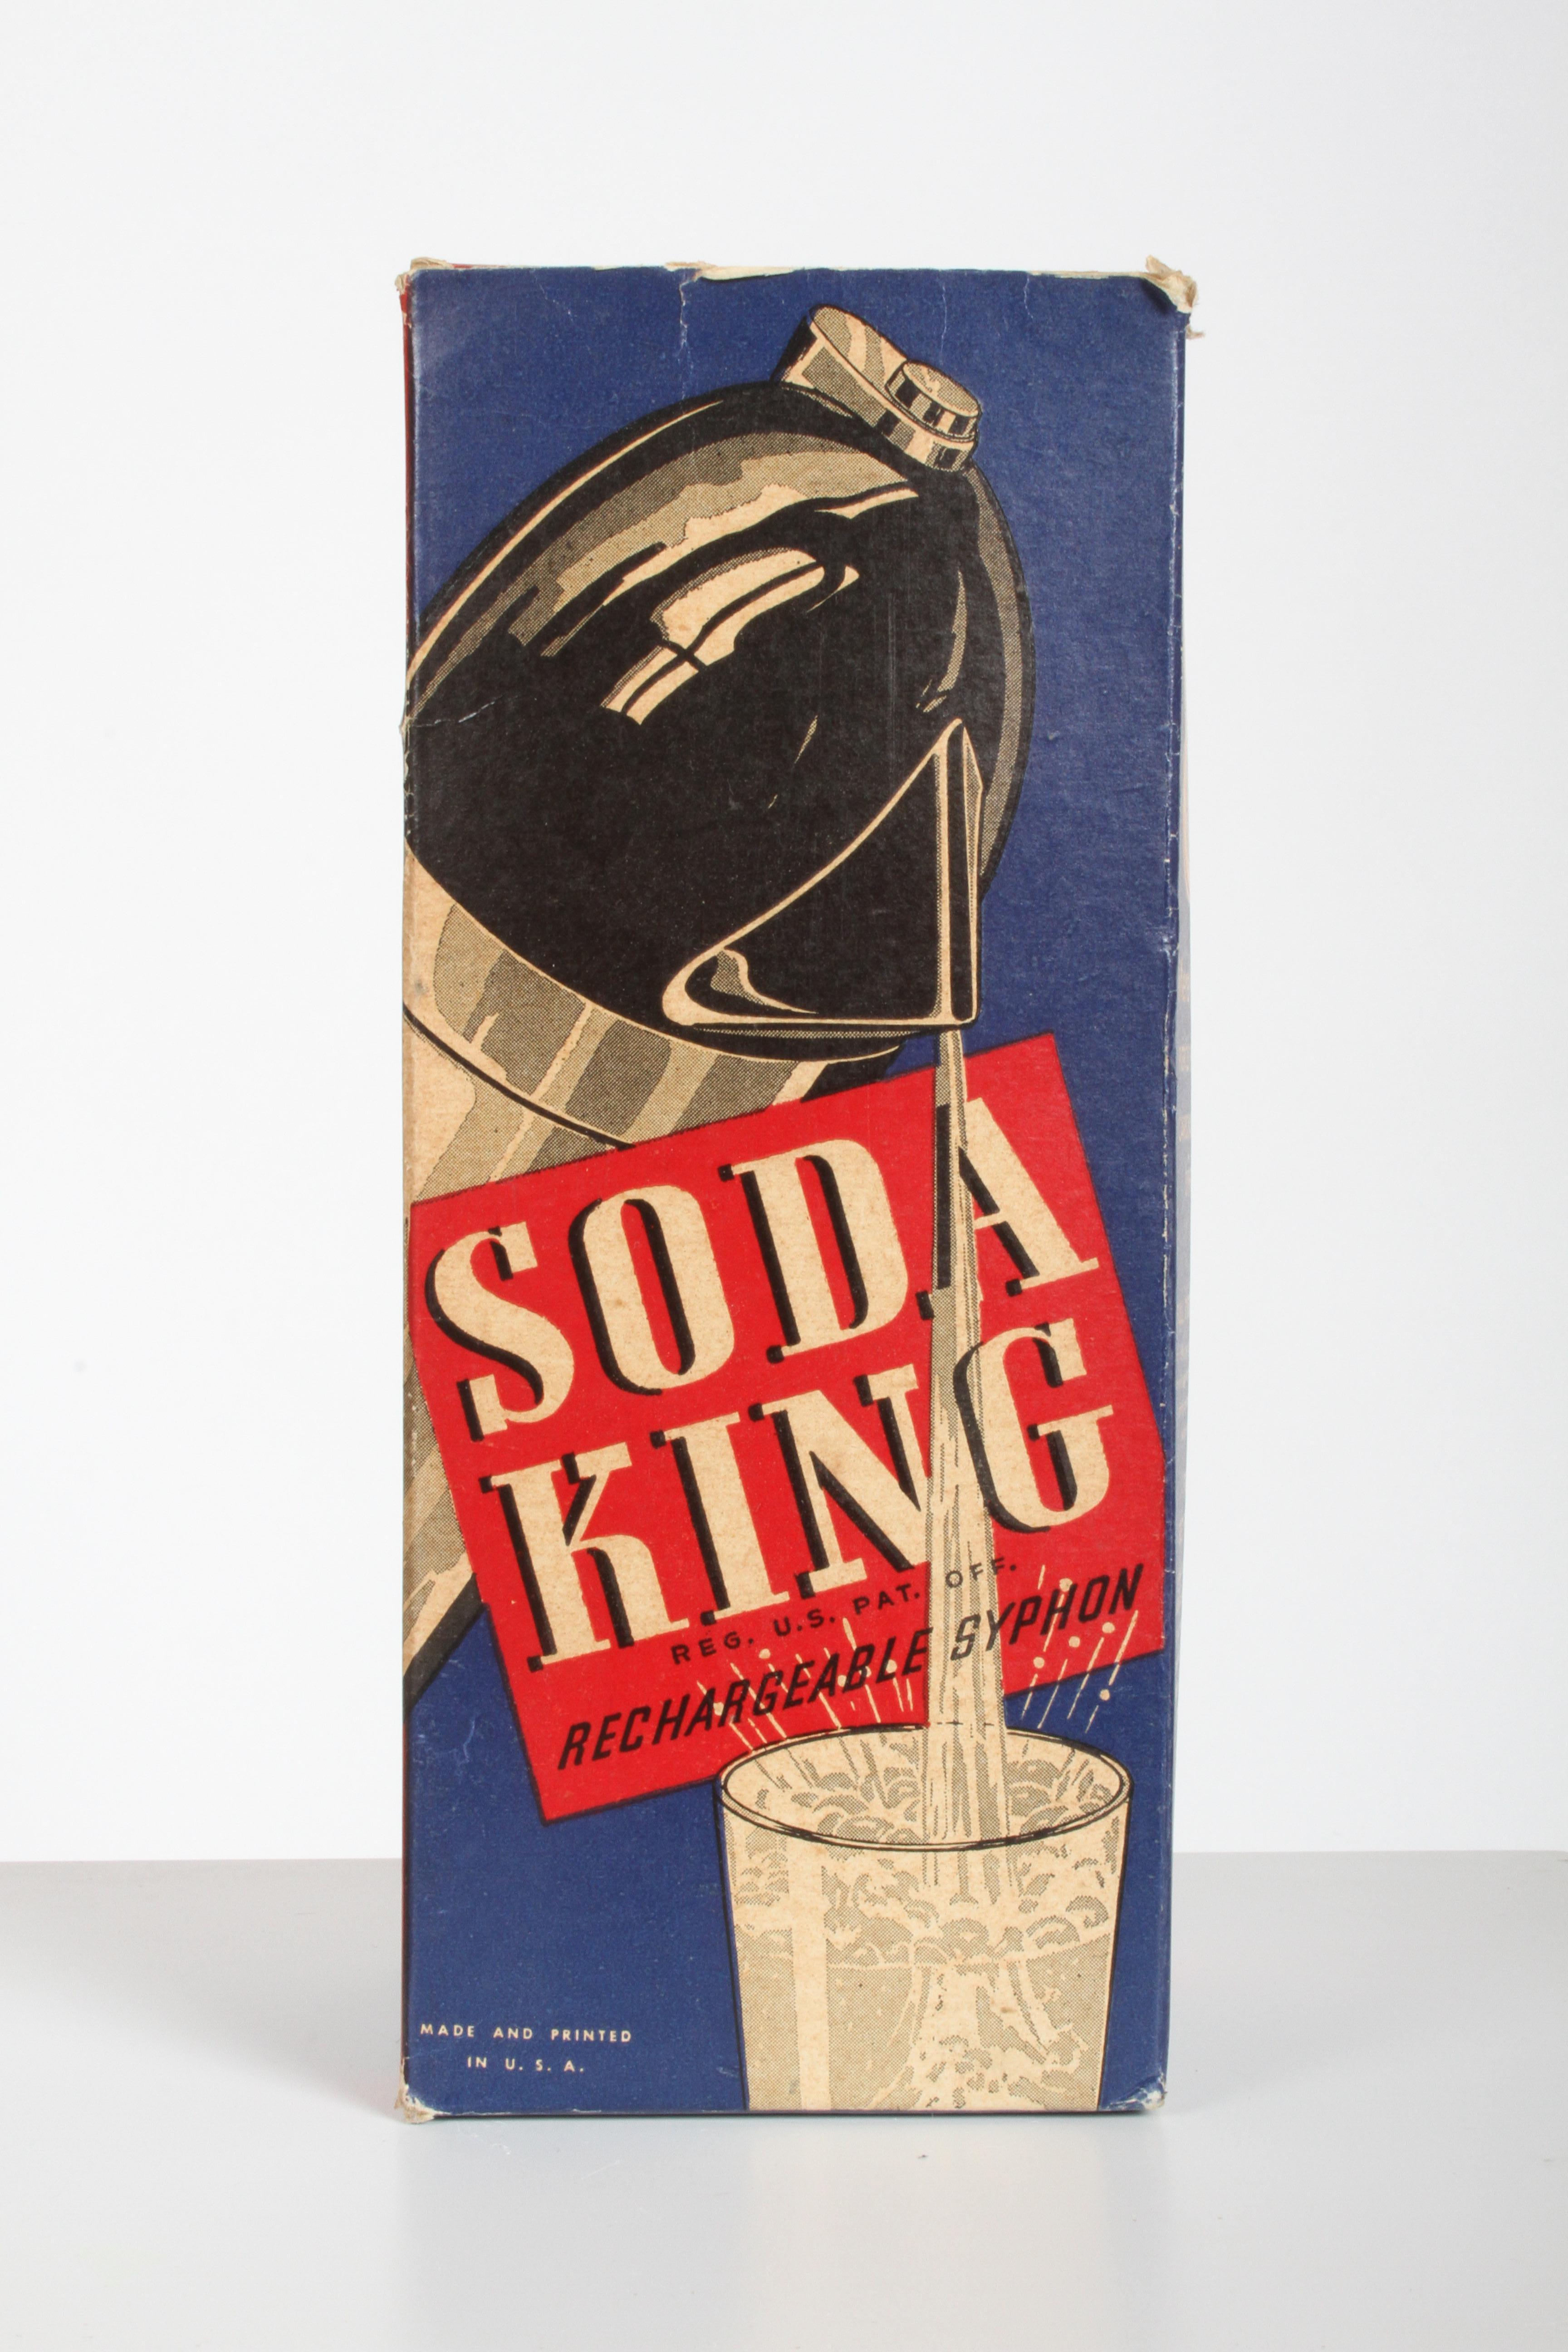 Norman Bel Geddes Soda King rechargeable syphon circa 1938, unused Art Deco / Machine Age / Industrial designer Norman Bel Geddes's chrome plated and enamel Soda King rechargeable syphon, designed in 1938. Belongs in a museum, as it is unused and in